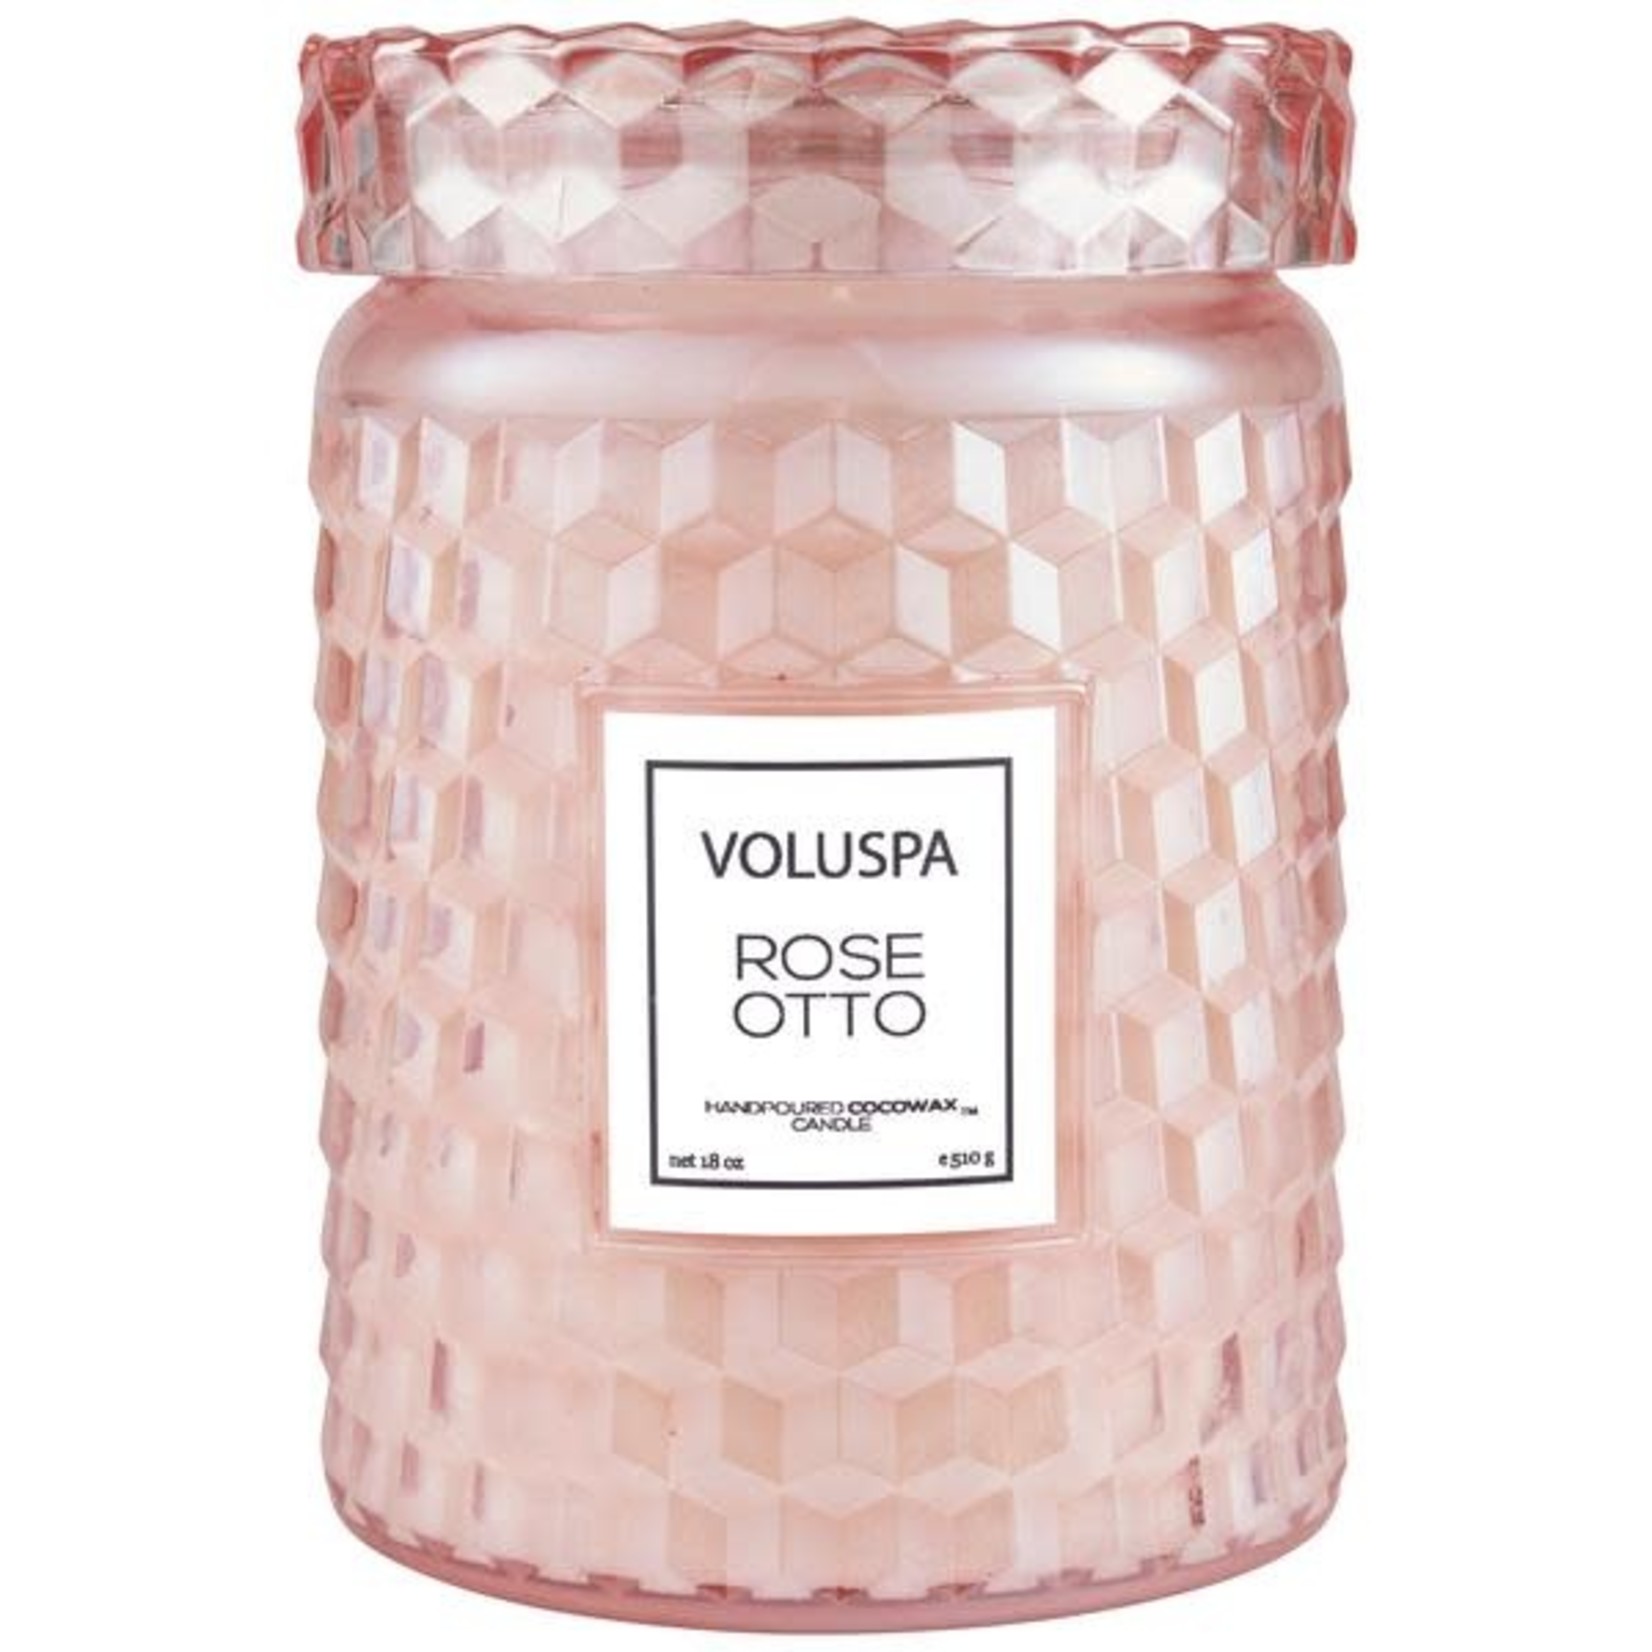 Voluspa Rose Otto large Glass Jar with Lid